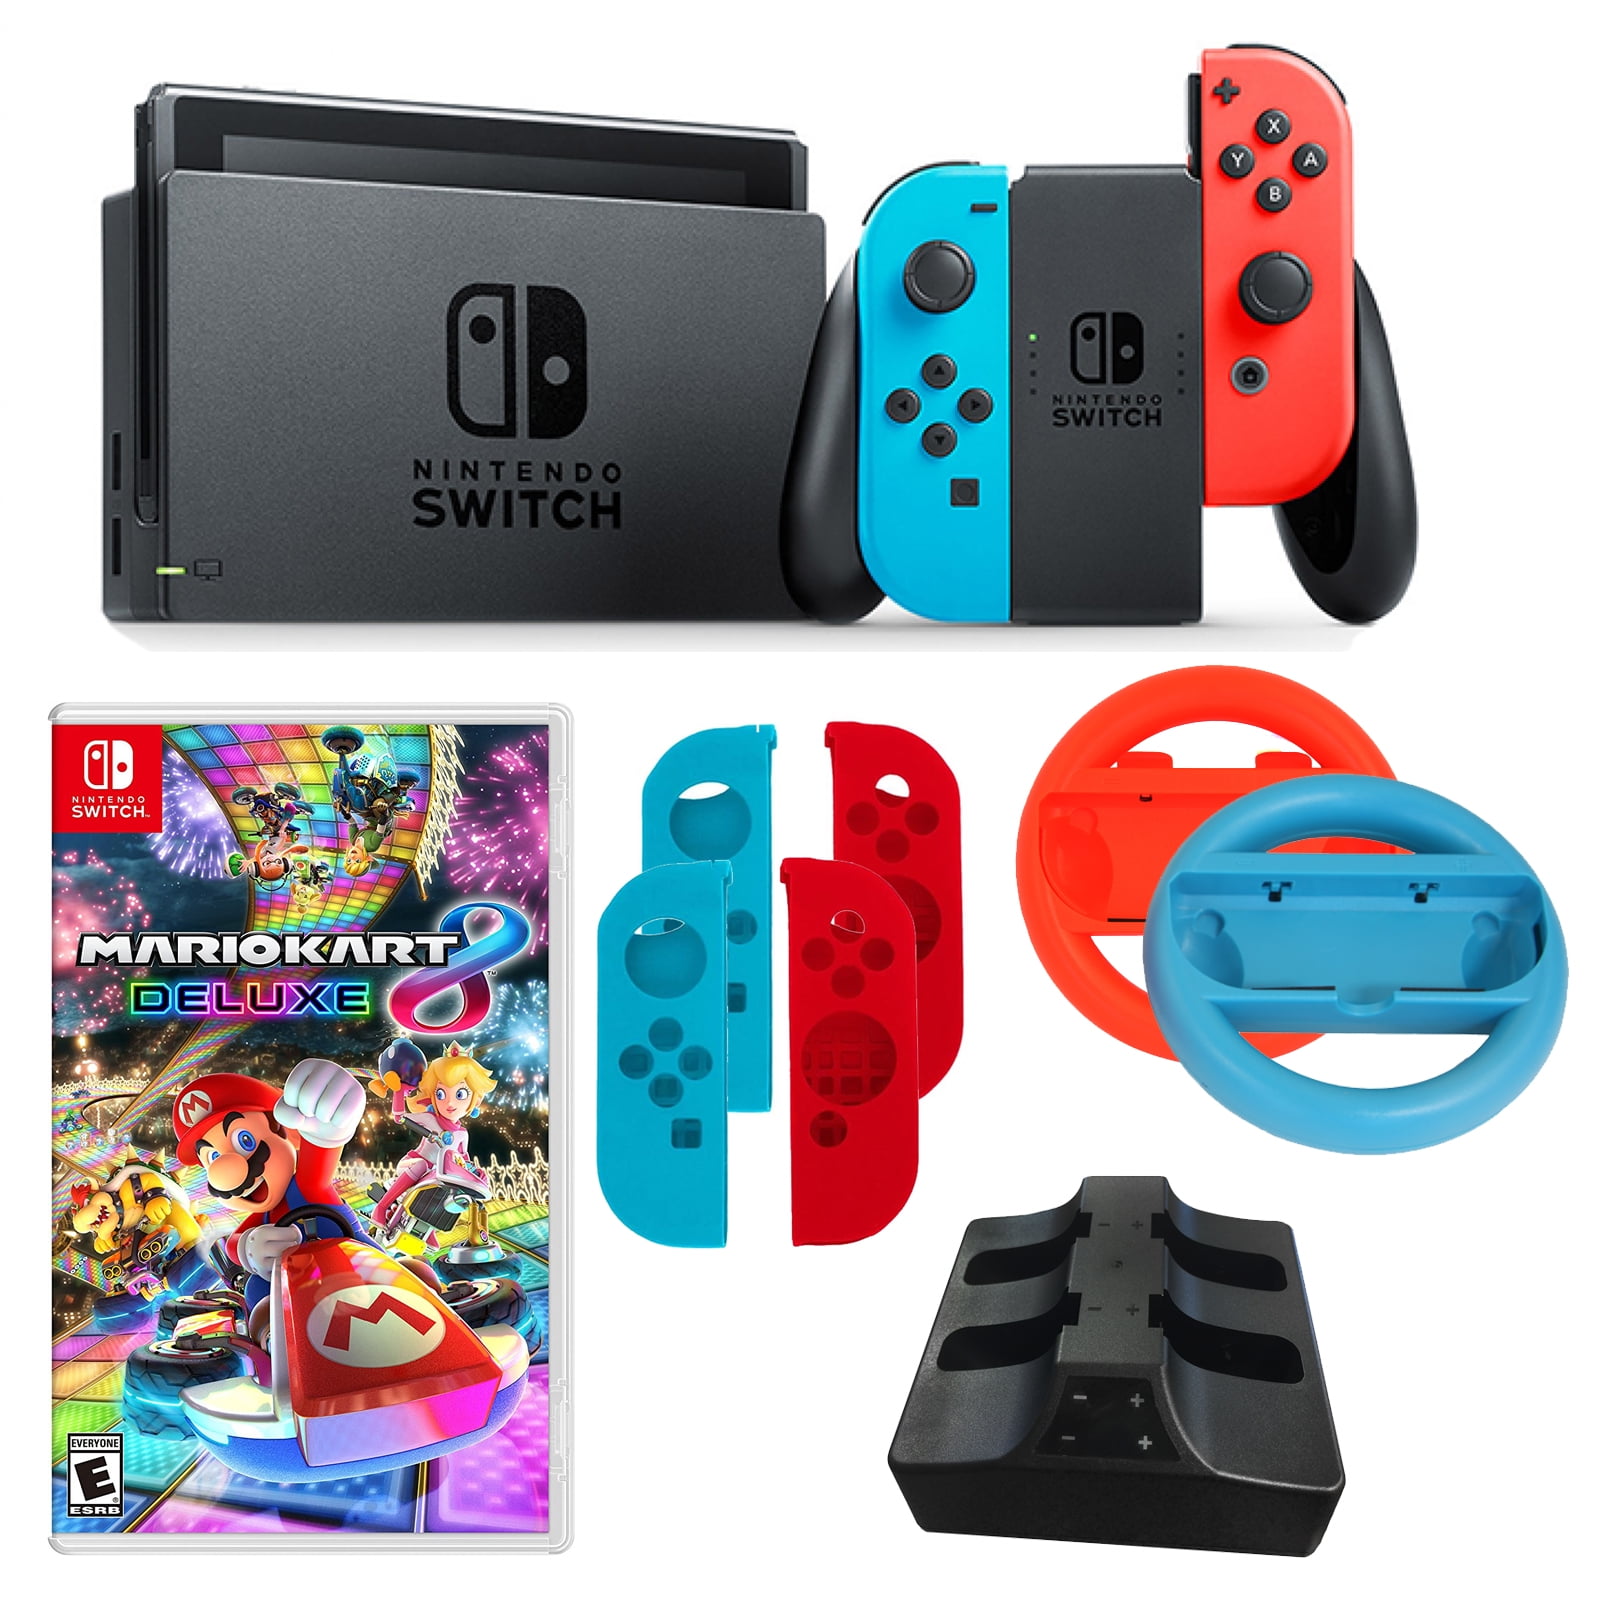 Nintendo Switch In Neon With Mario Kart Game And Accessories Walmartcom - roblox clothing codes in neon city game